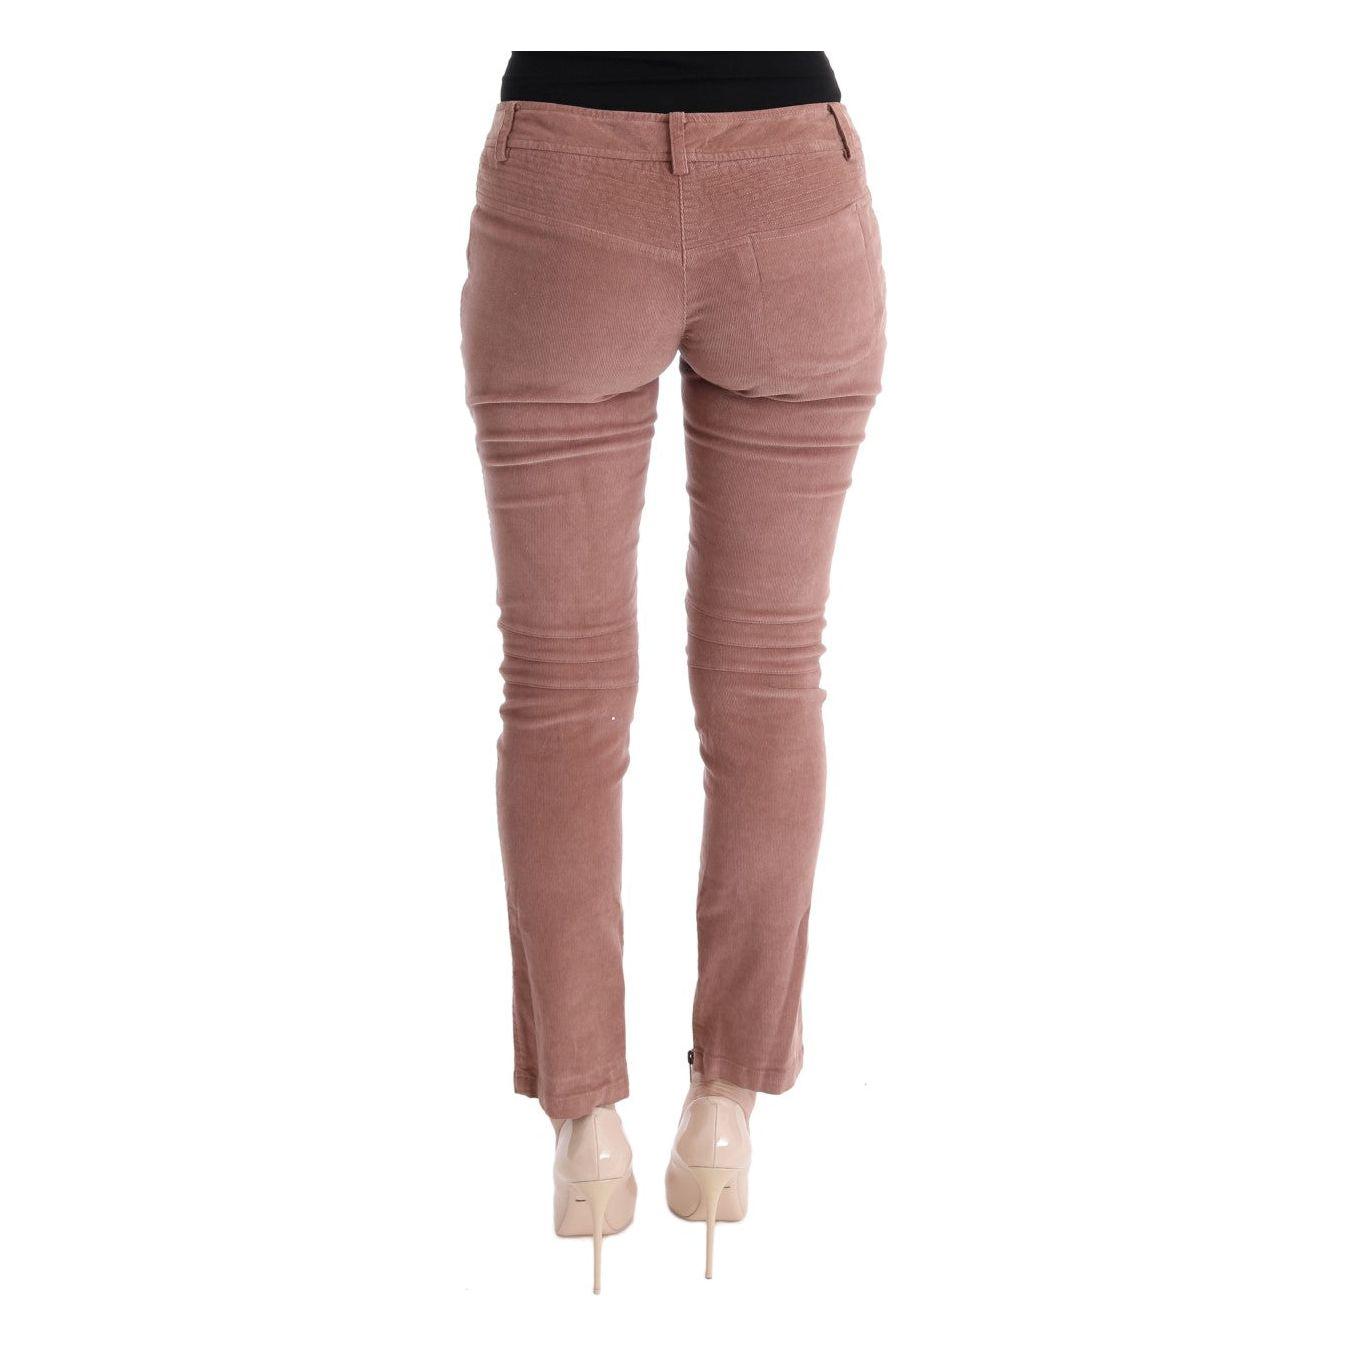 Ermanno Scervino Chic Brown Capri Cropped Pants for Elegant Evenings pink-velvet-cropped-casual-pants